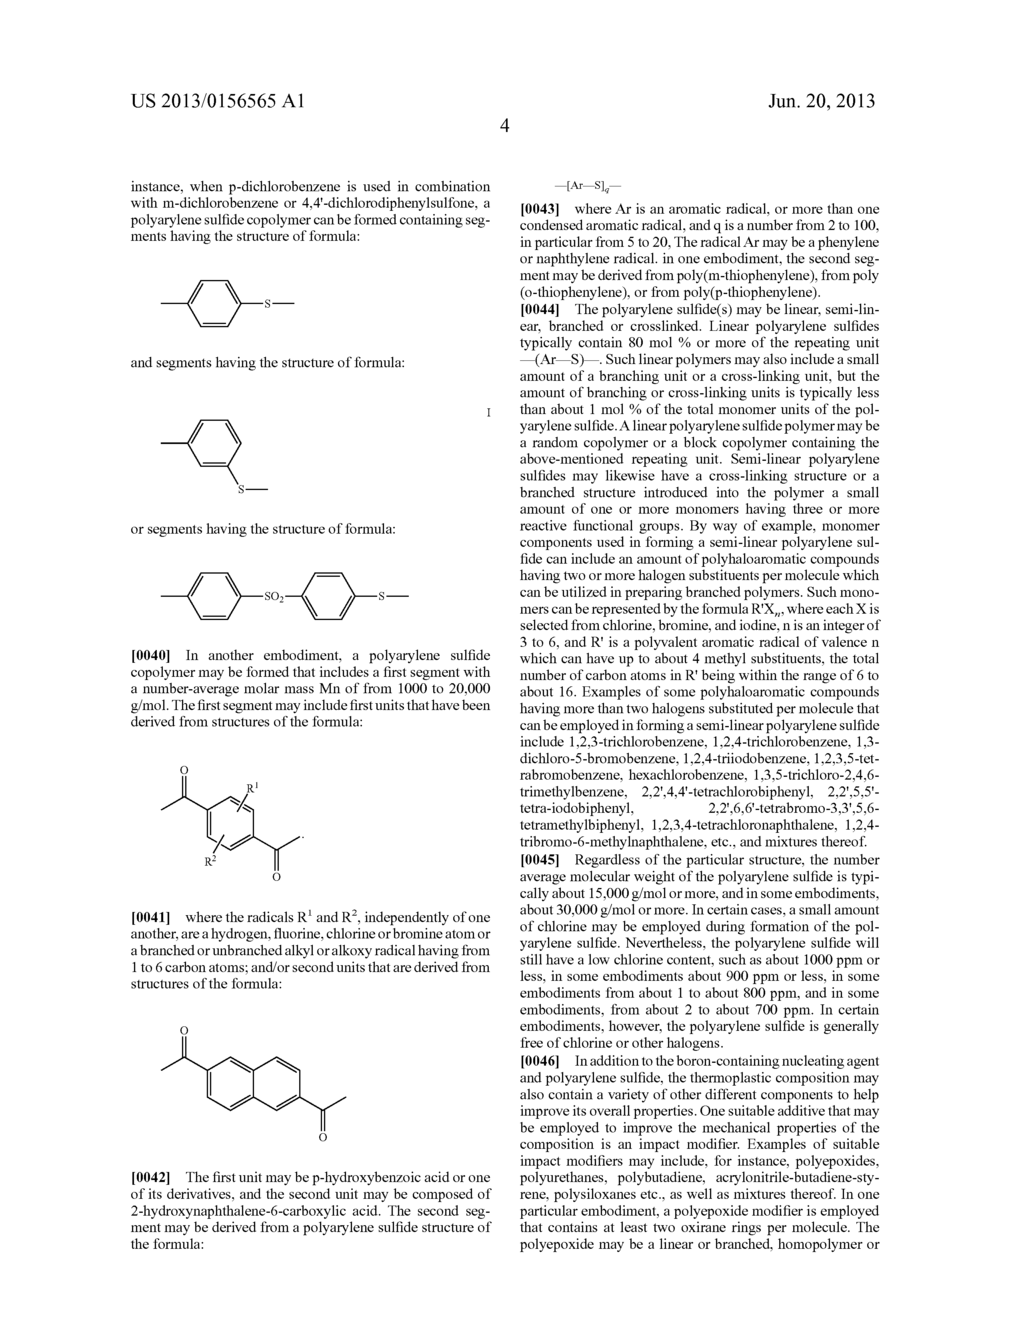 Boron-Containing Nucleating Agent for Polyphenylene Sulfide - diagram, schematic, and image 09